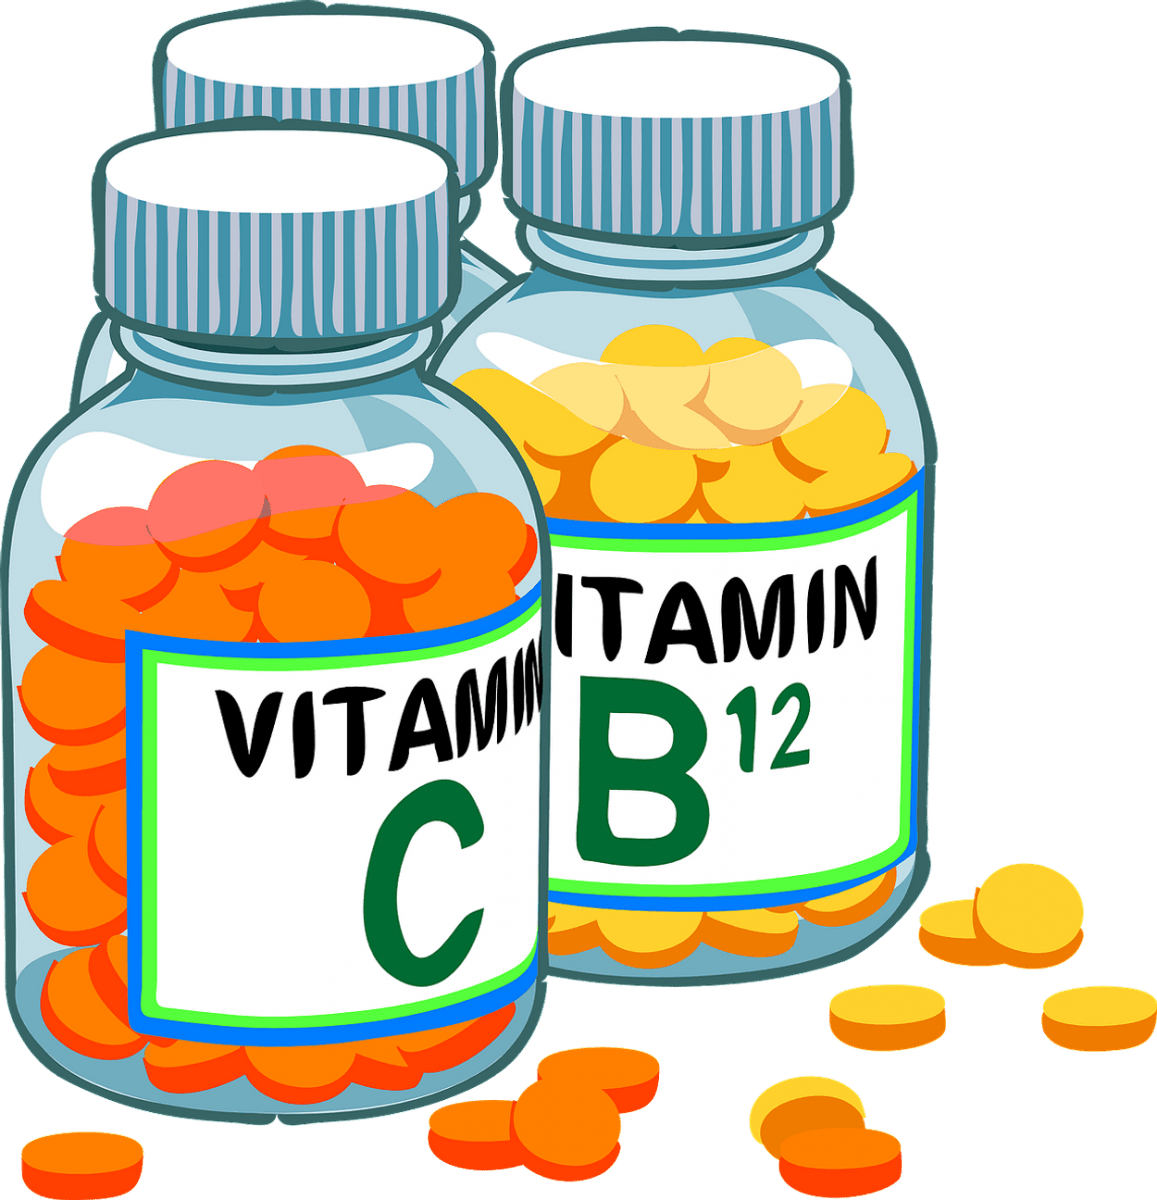 Two bottle of Vitamin C and Vitamin B12 supplement